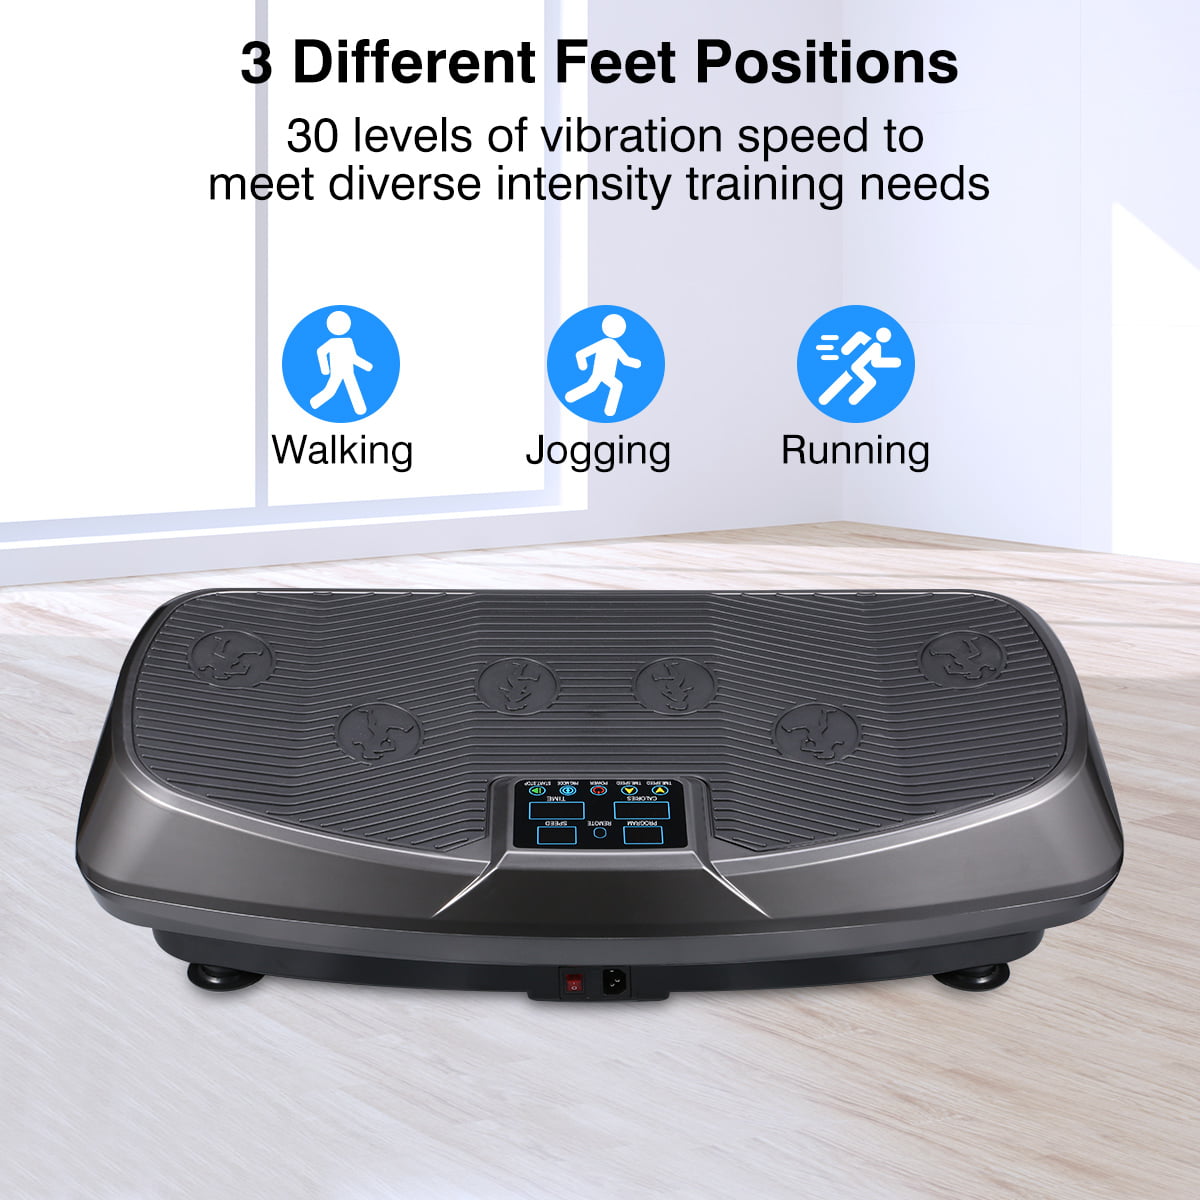 KUOKEL Workout Vibration Plate Exercise Machine with Dual Motors Remote Control 